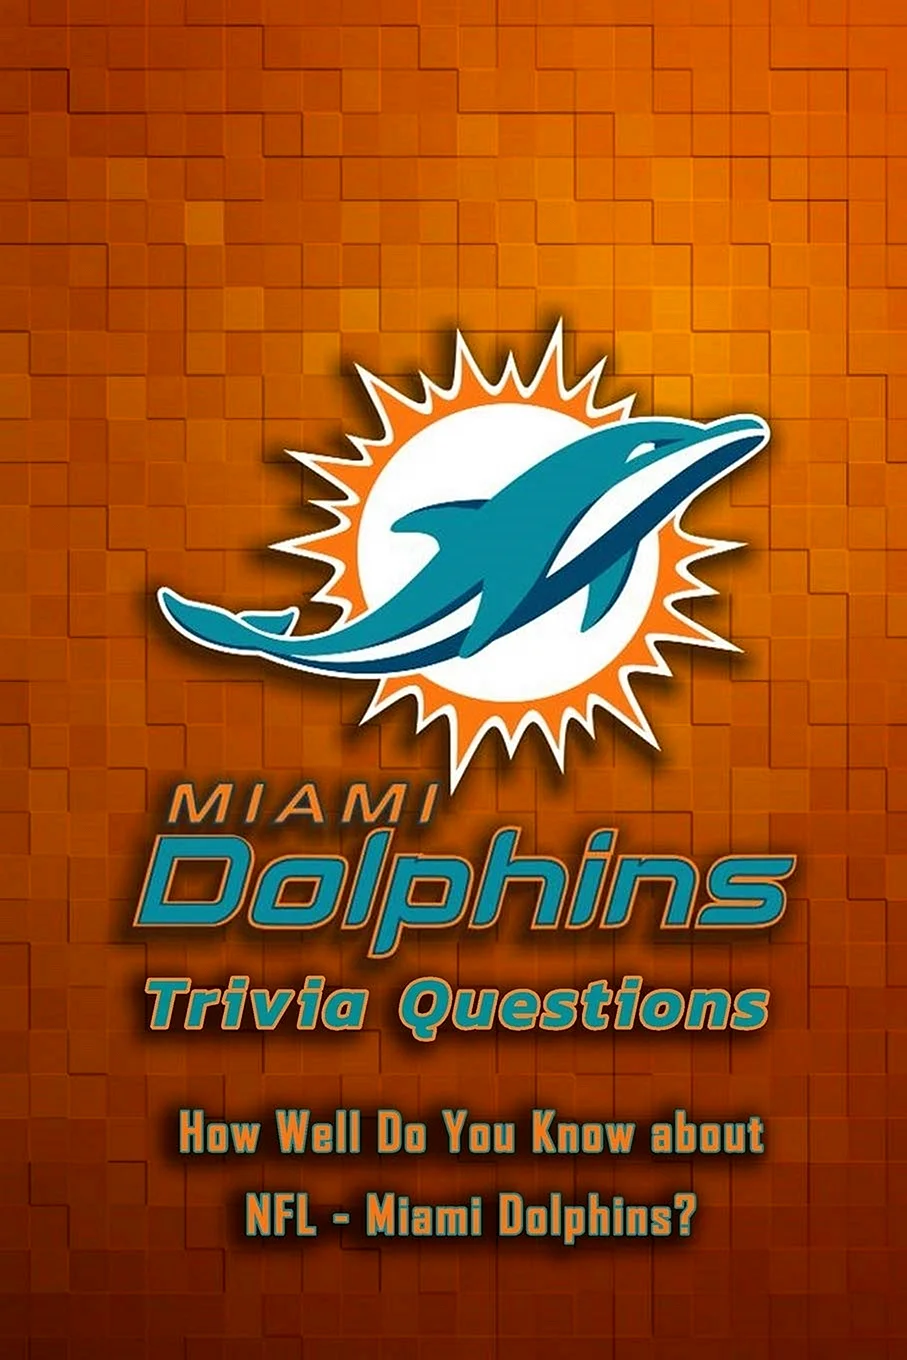 Miami Dolphins Wallpaper For iPhone